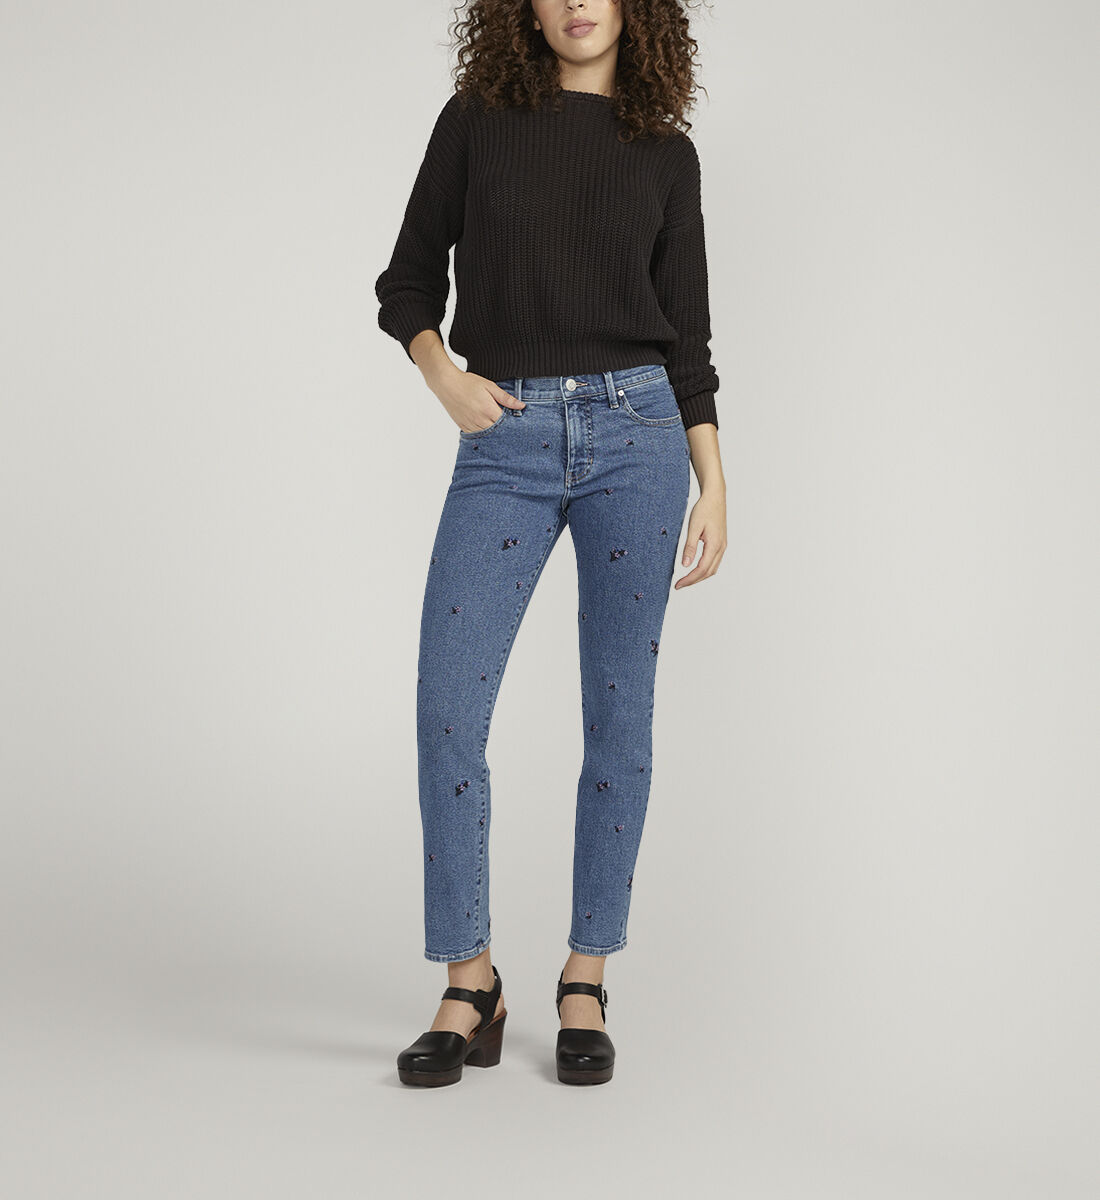 Buy Cassie for USD 108.00 | Jag Jeans US New